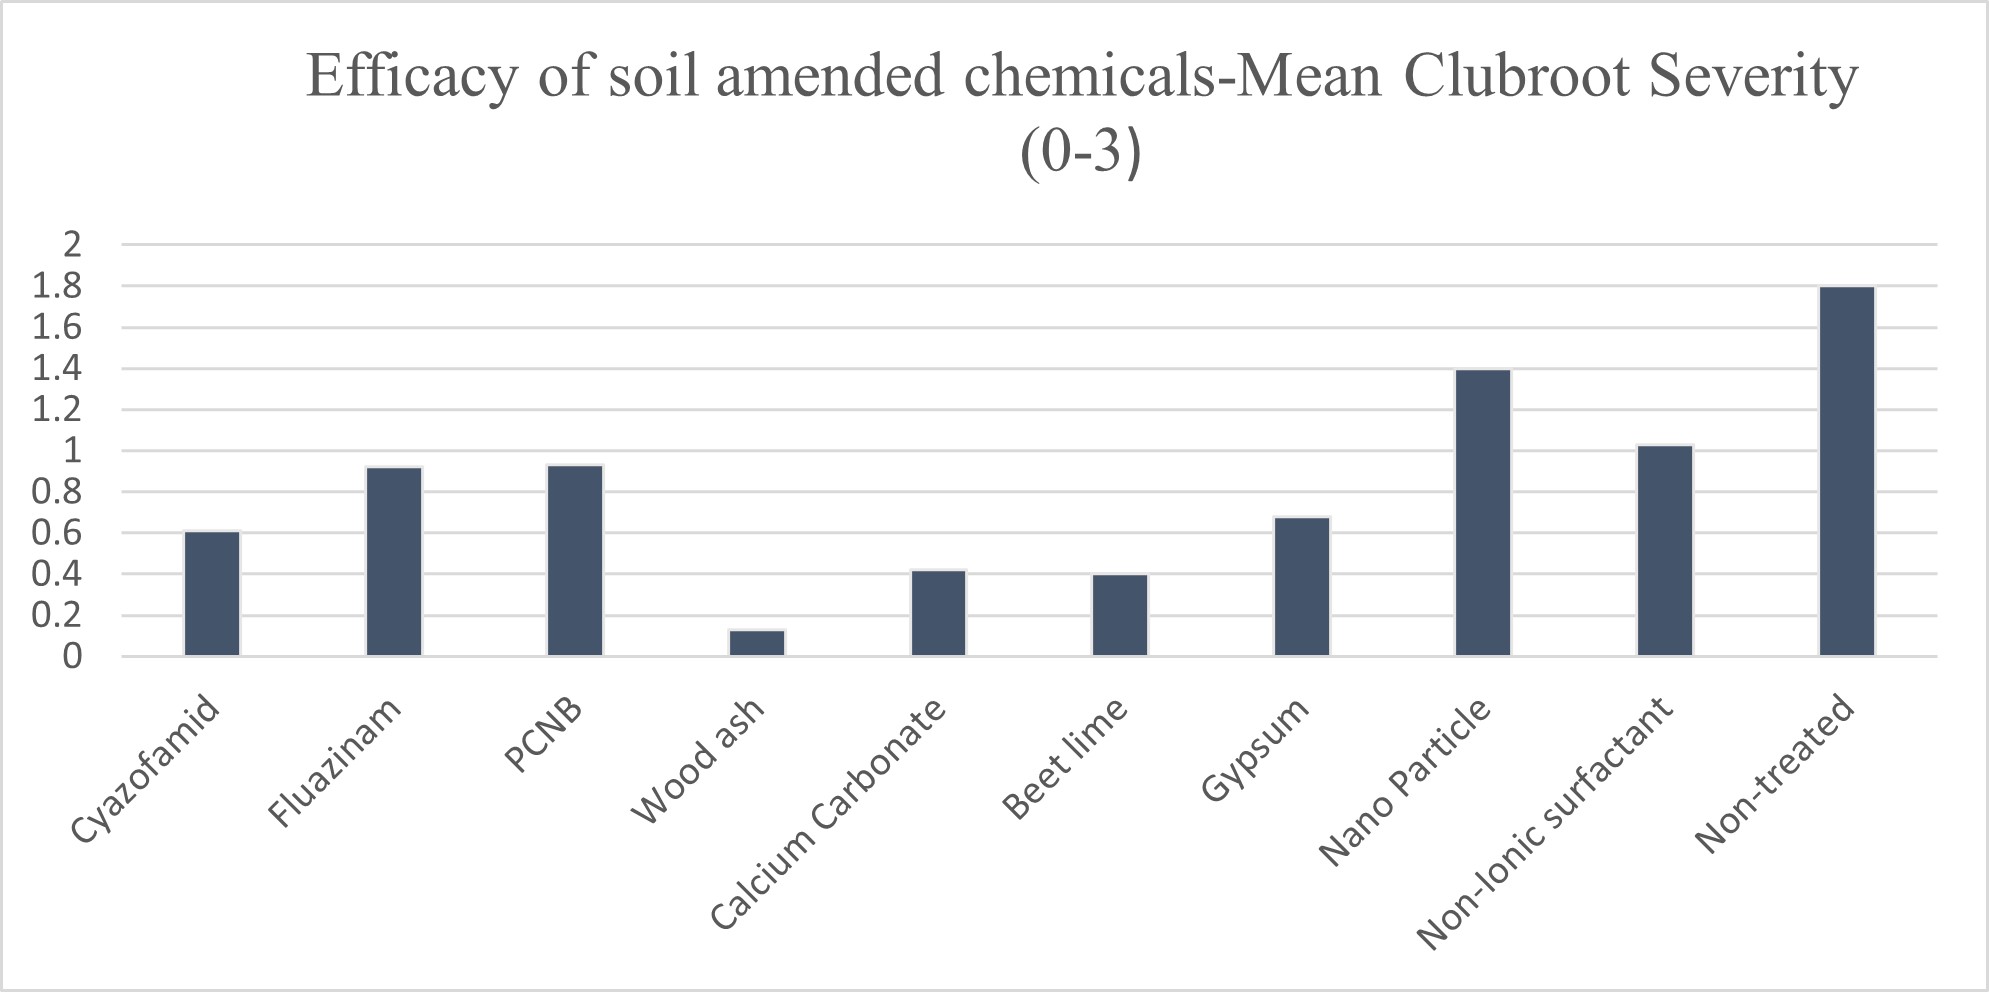 Figure 2: Efficacy of fungicides and soil ameliorating products against clubroot severity in field conditions.